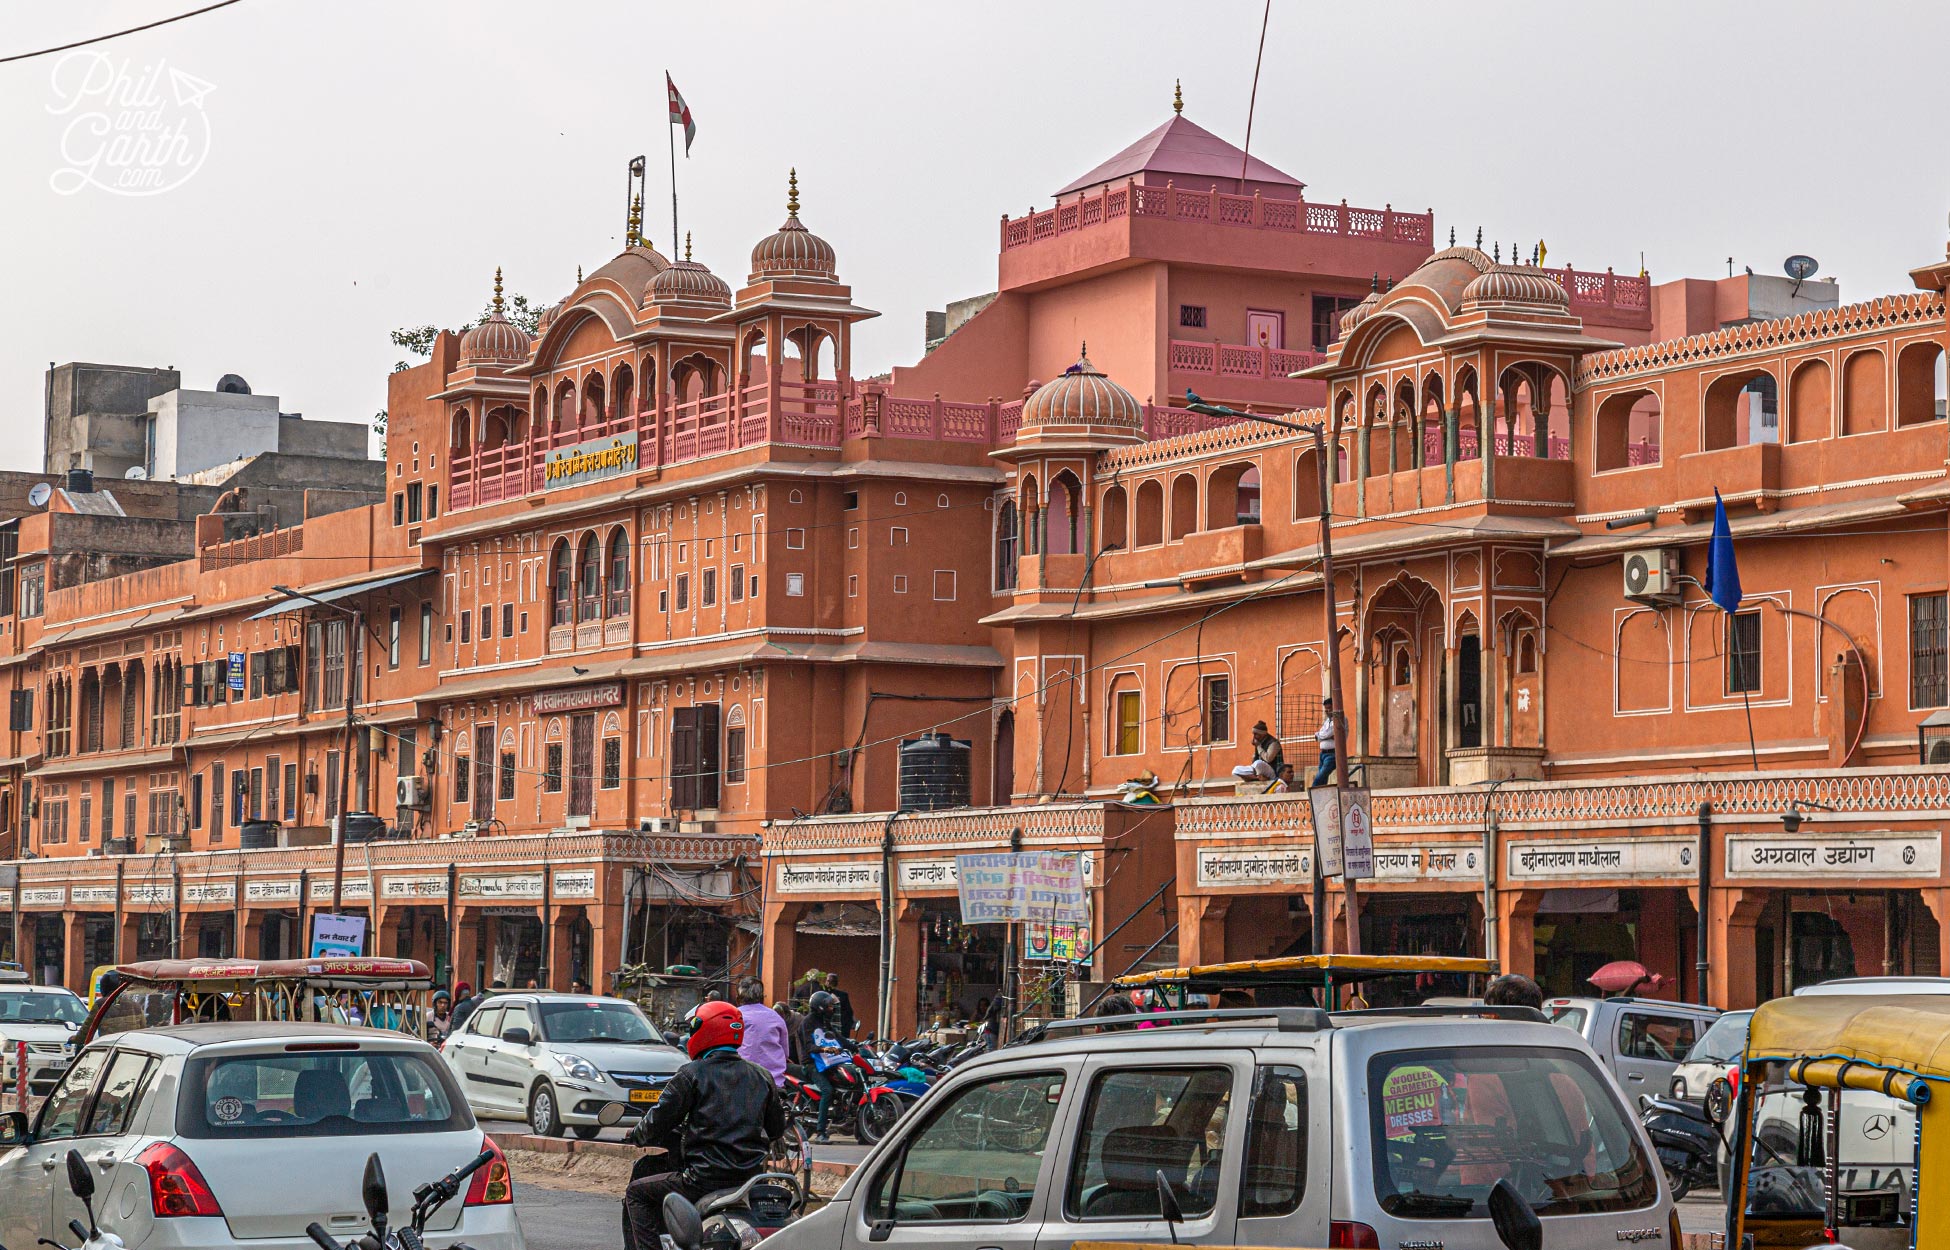 Jaipur is famous for its palaces, fine jewellery and textiles